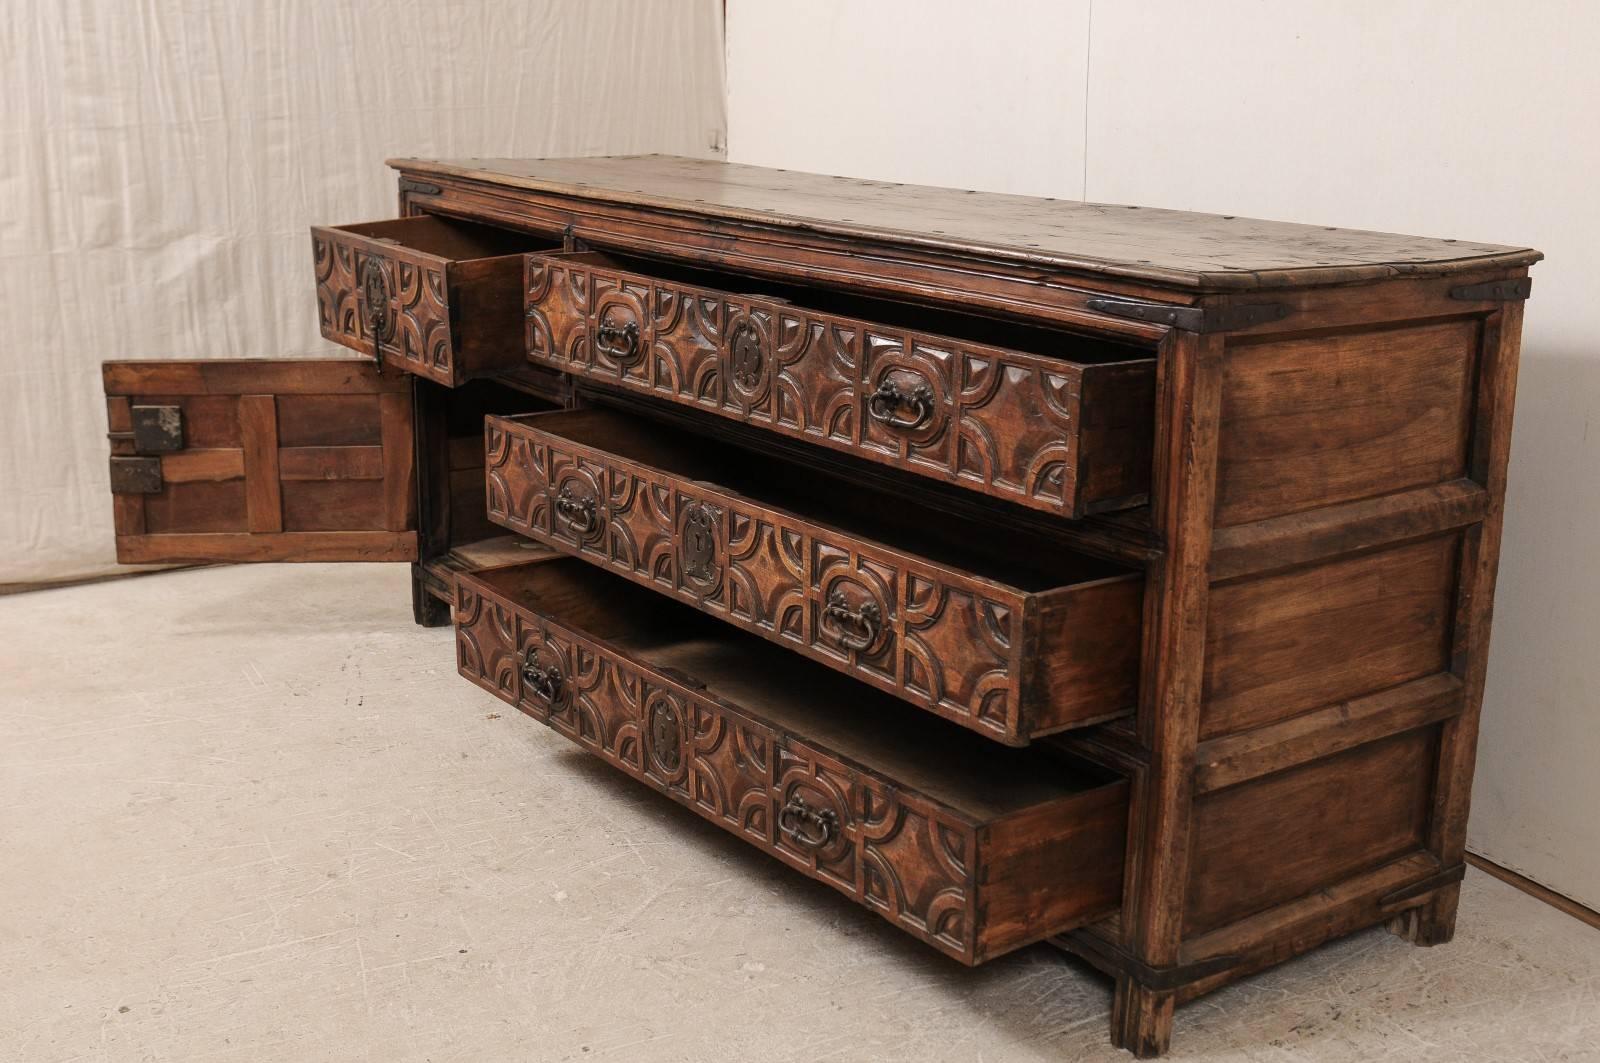 Exquisite 18th Century Spanish Sacristy Chest with Carved Wood Detailed Pattern 1